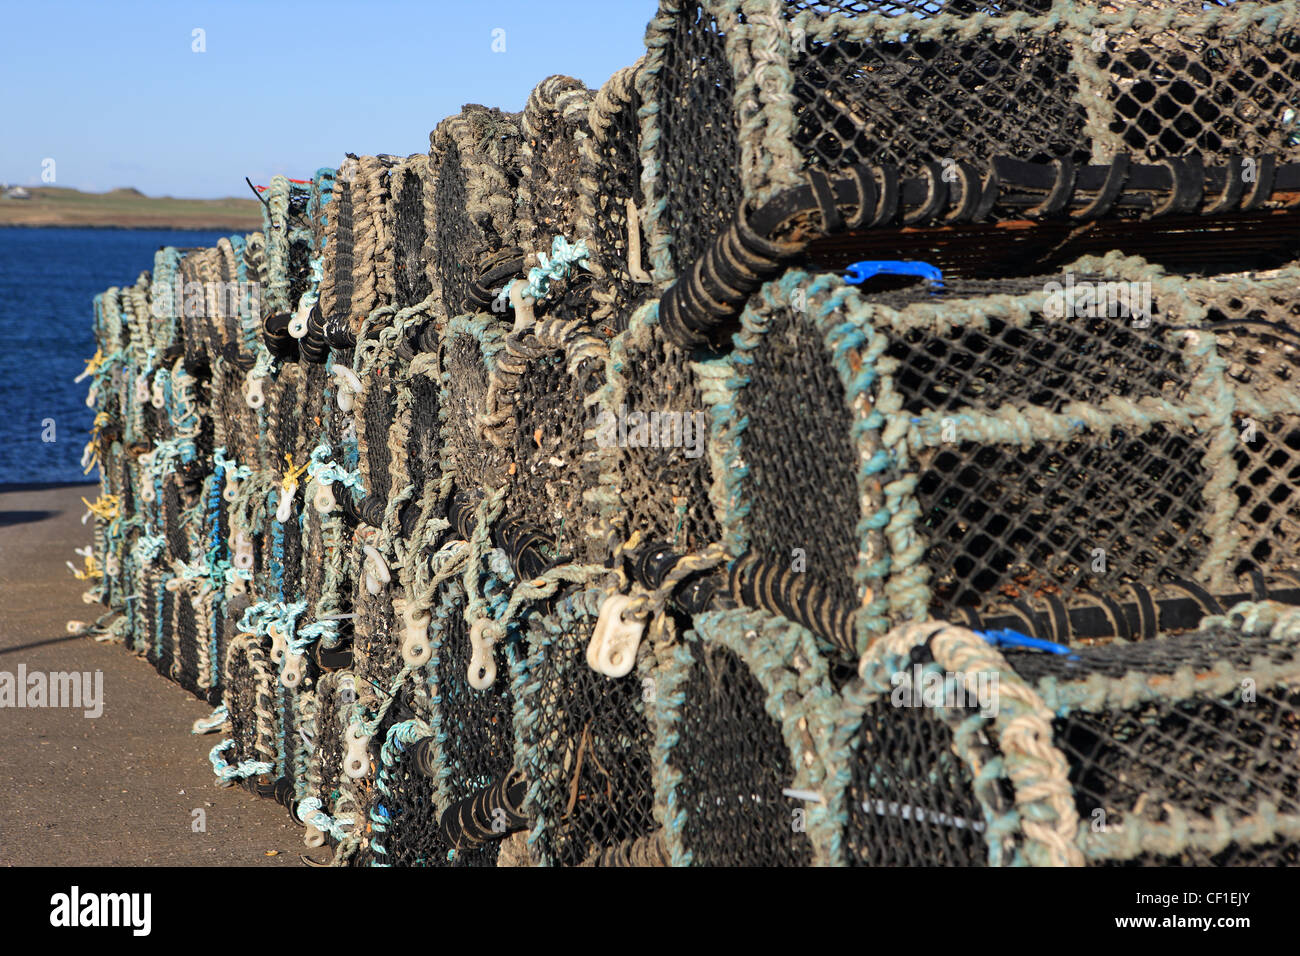 https://c8.alamy.com/comp/CF1EJY/neatly-stacked-fishing-creels-on-the-slipway-in-fionnphort-isle-of-CF1EJY.jpg